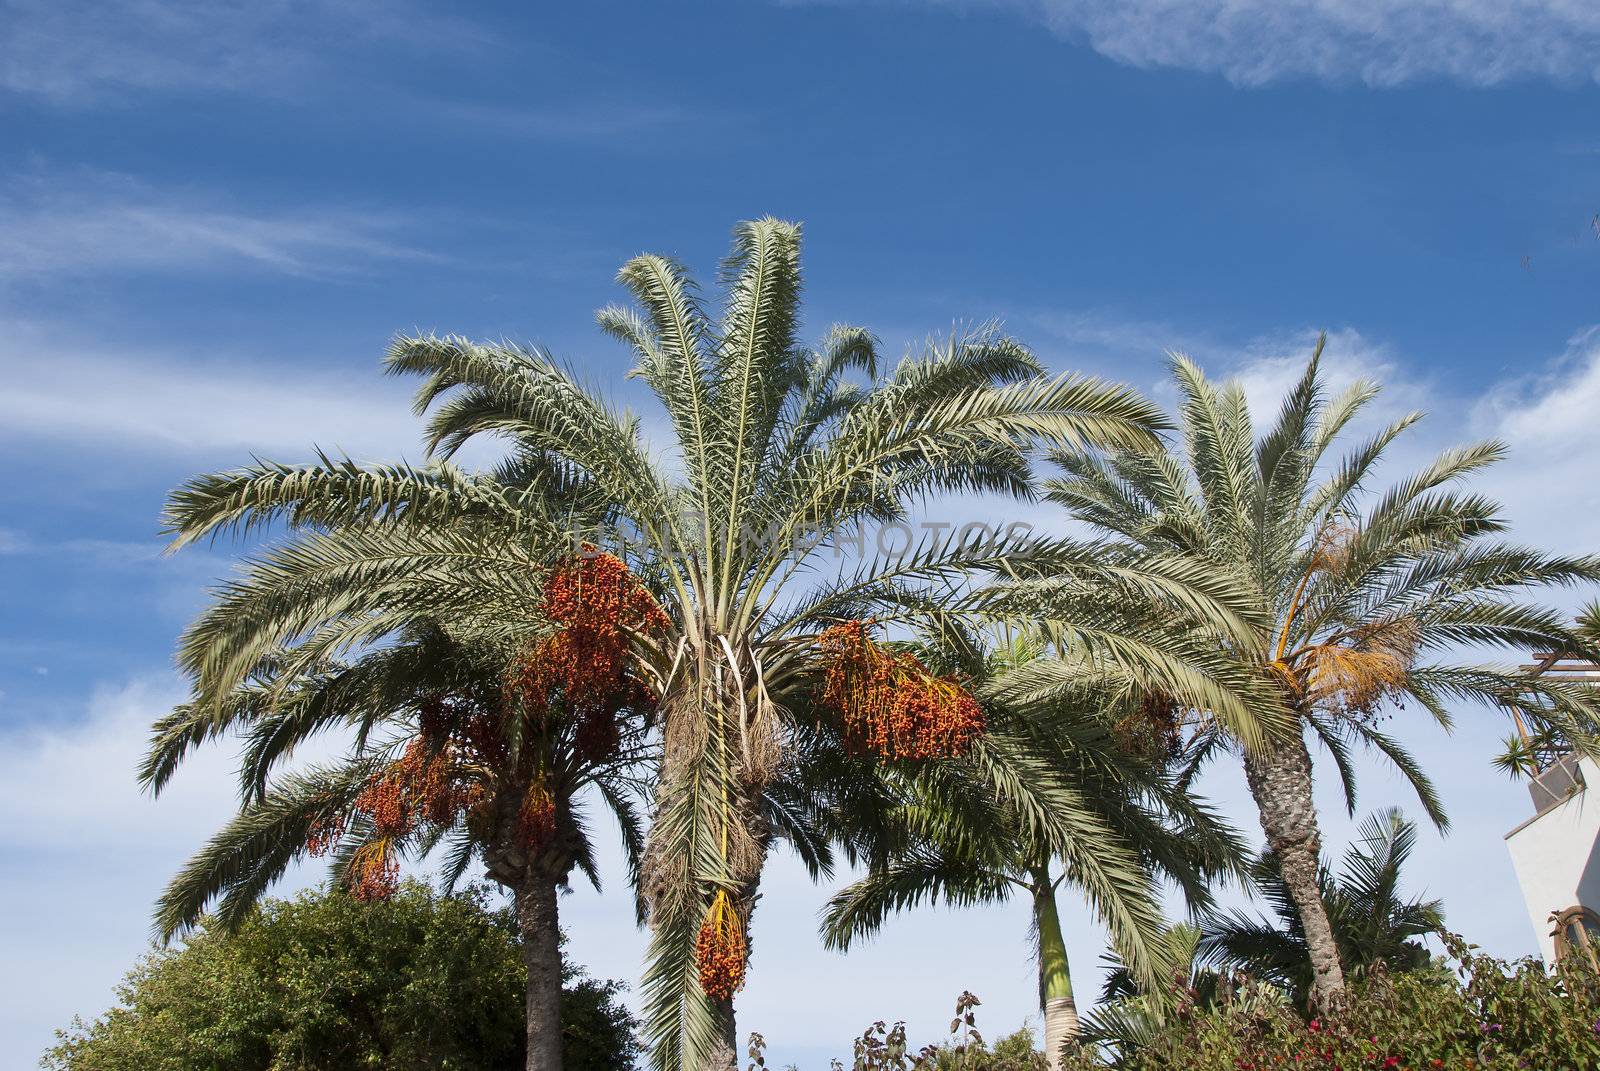 Two Date Palms laden with fruit under a blue sky